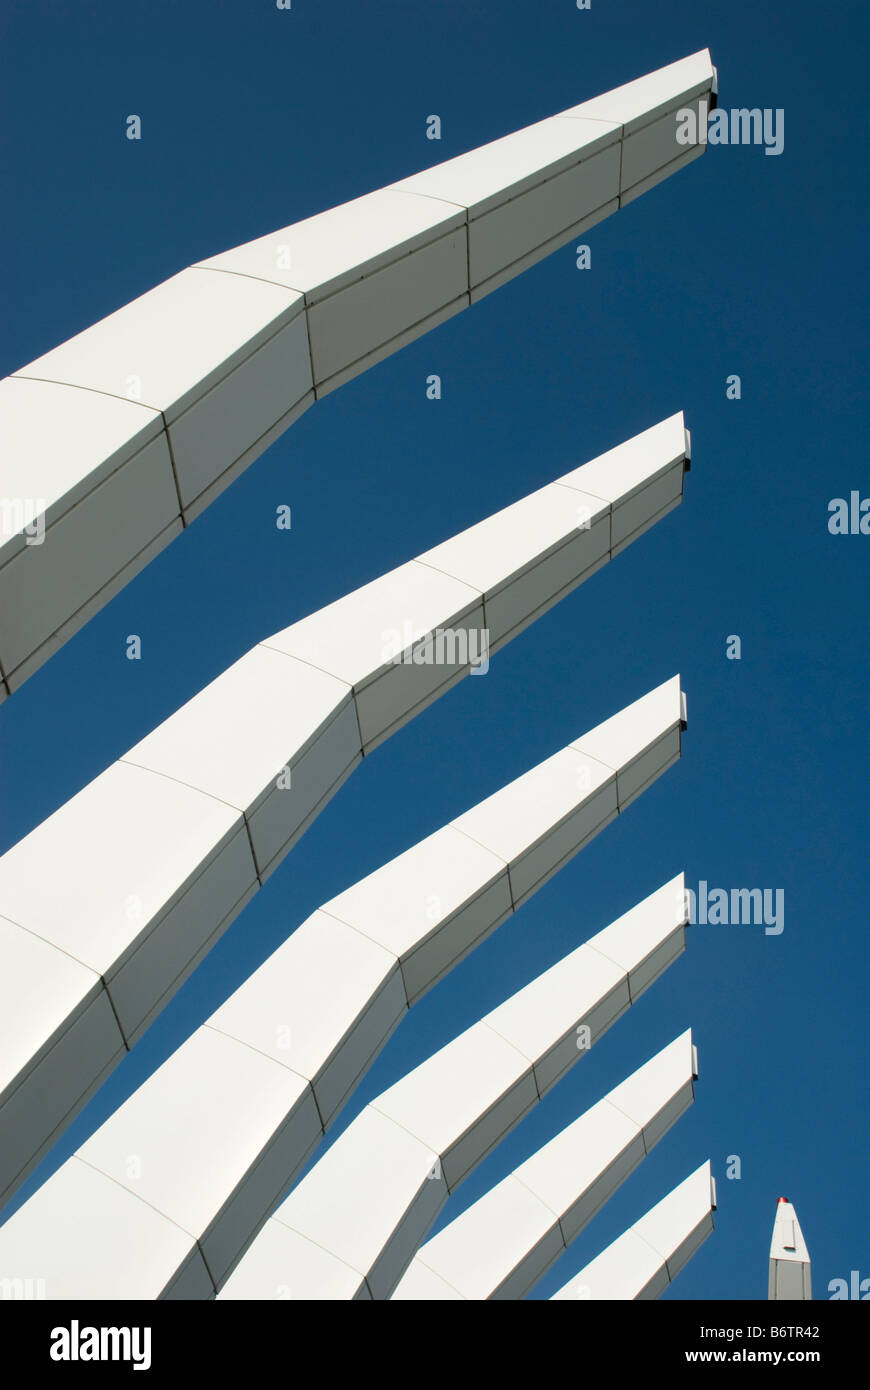 Roof spires on top of the IFC building in Hong Kong. Stock Photo